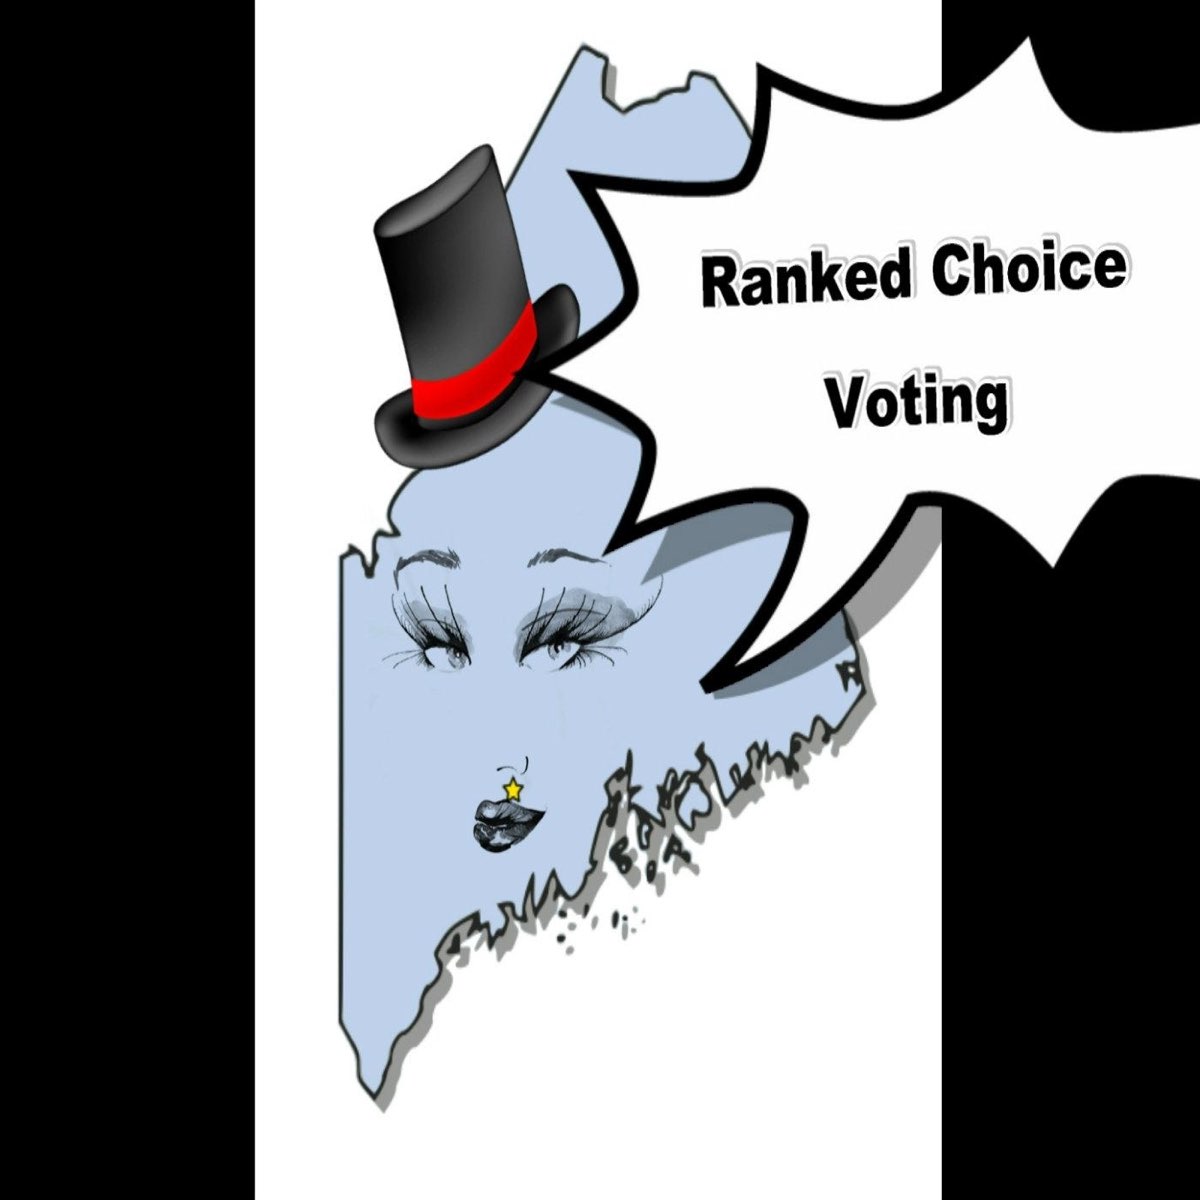 King choice vote. Ranked choice voting.